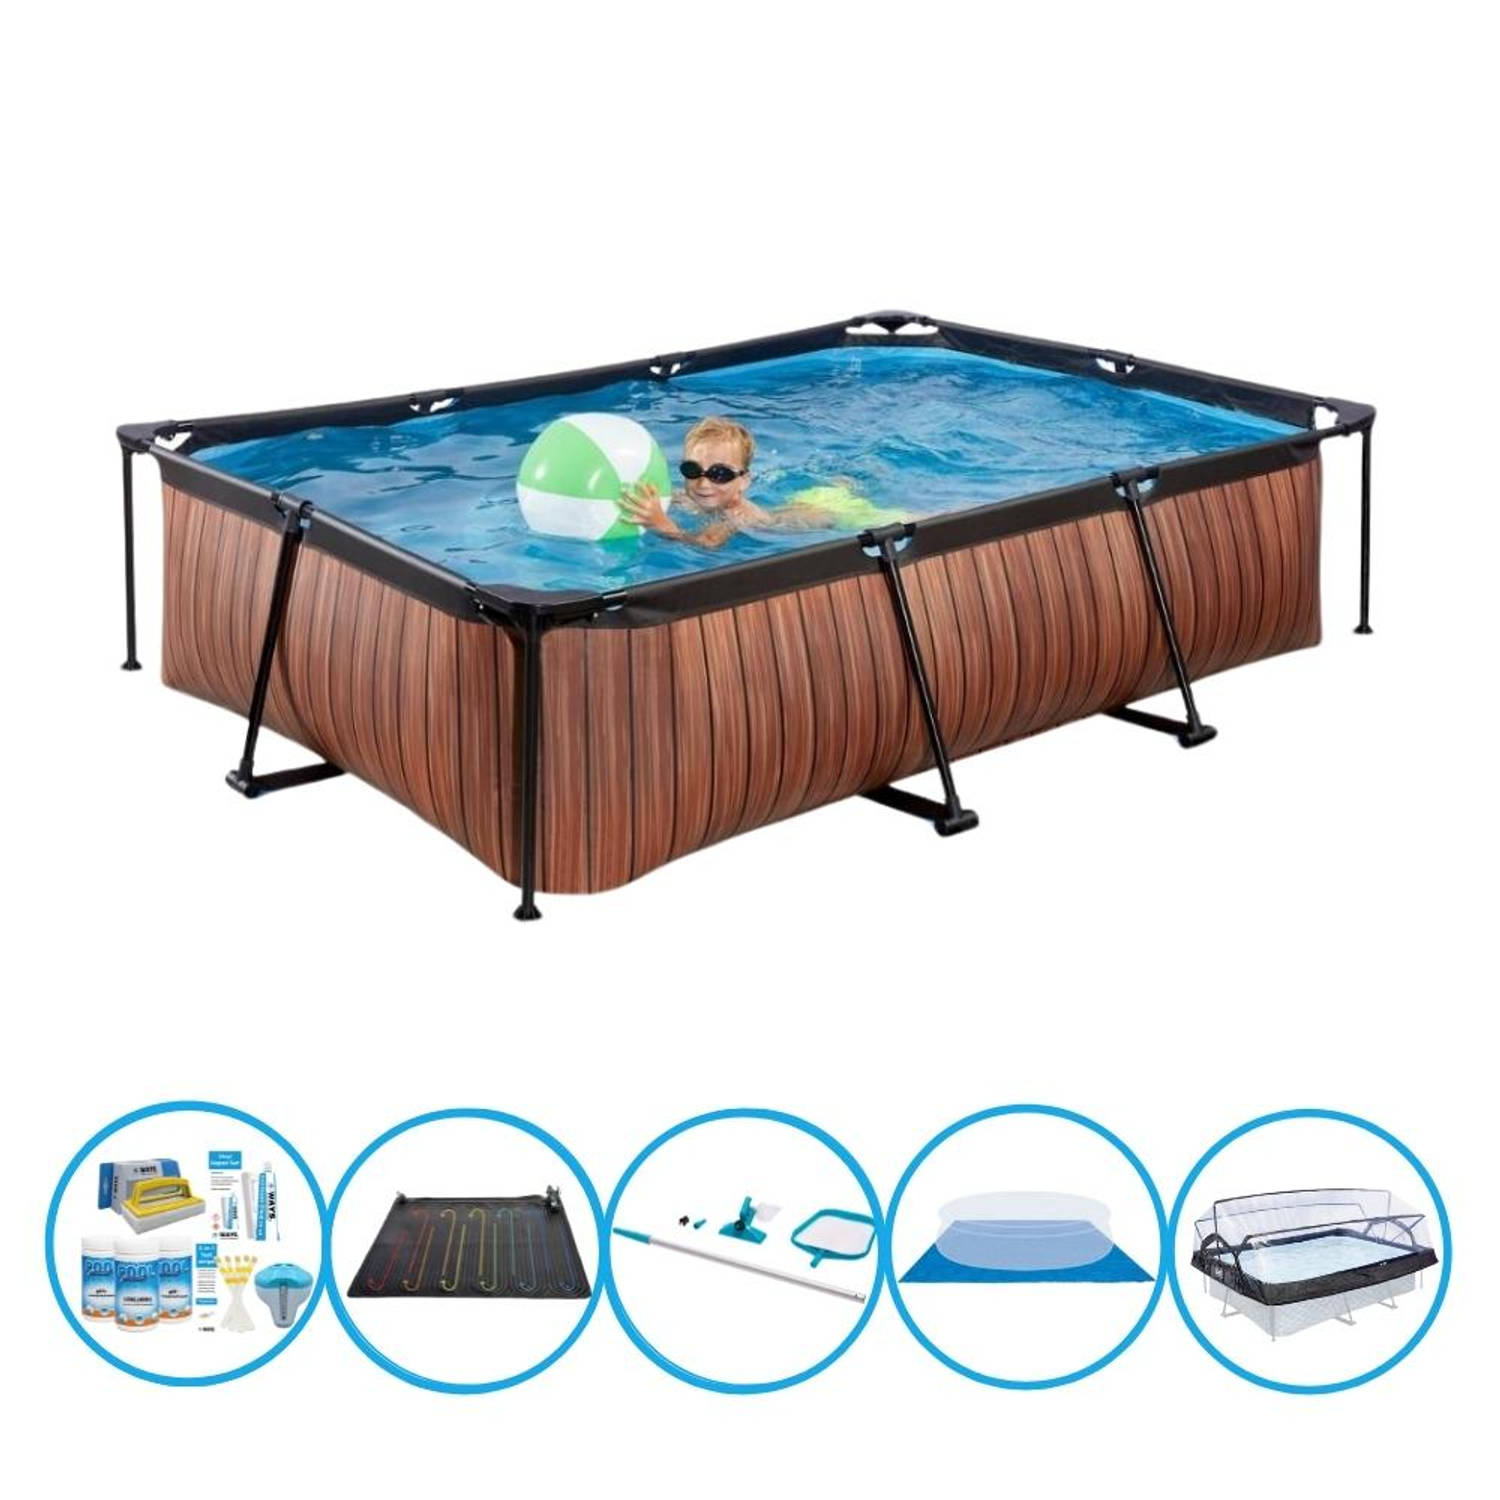 EXIT Zwembad Timber Style - 300x200x65 cm - Frame Pool - Inclusief accessoires